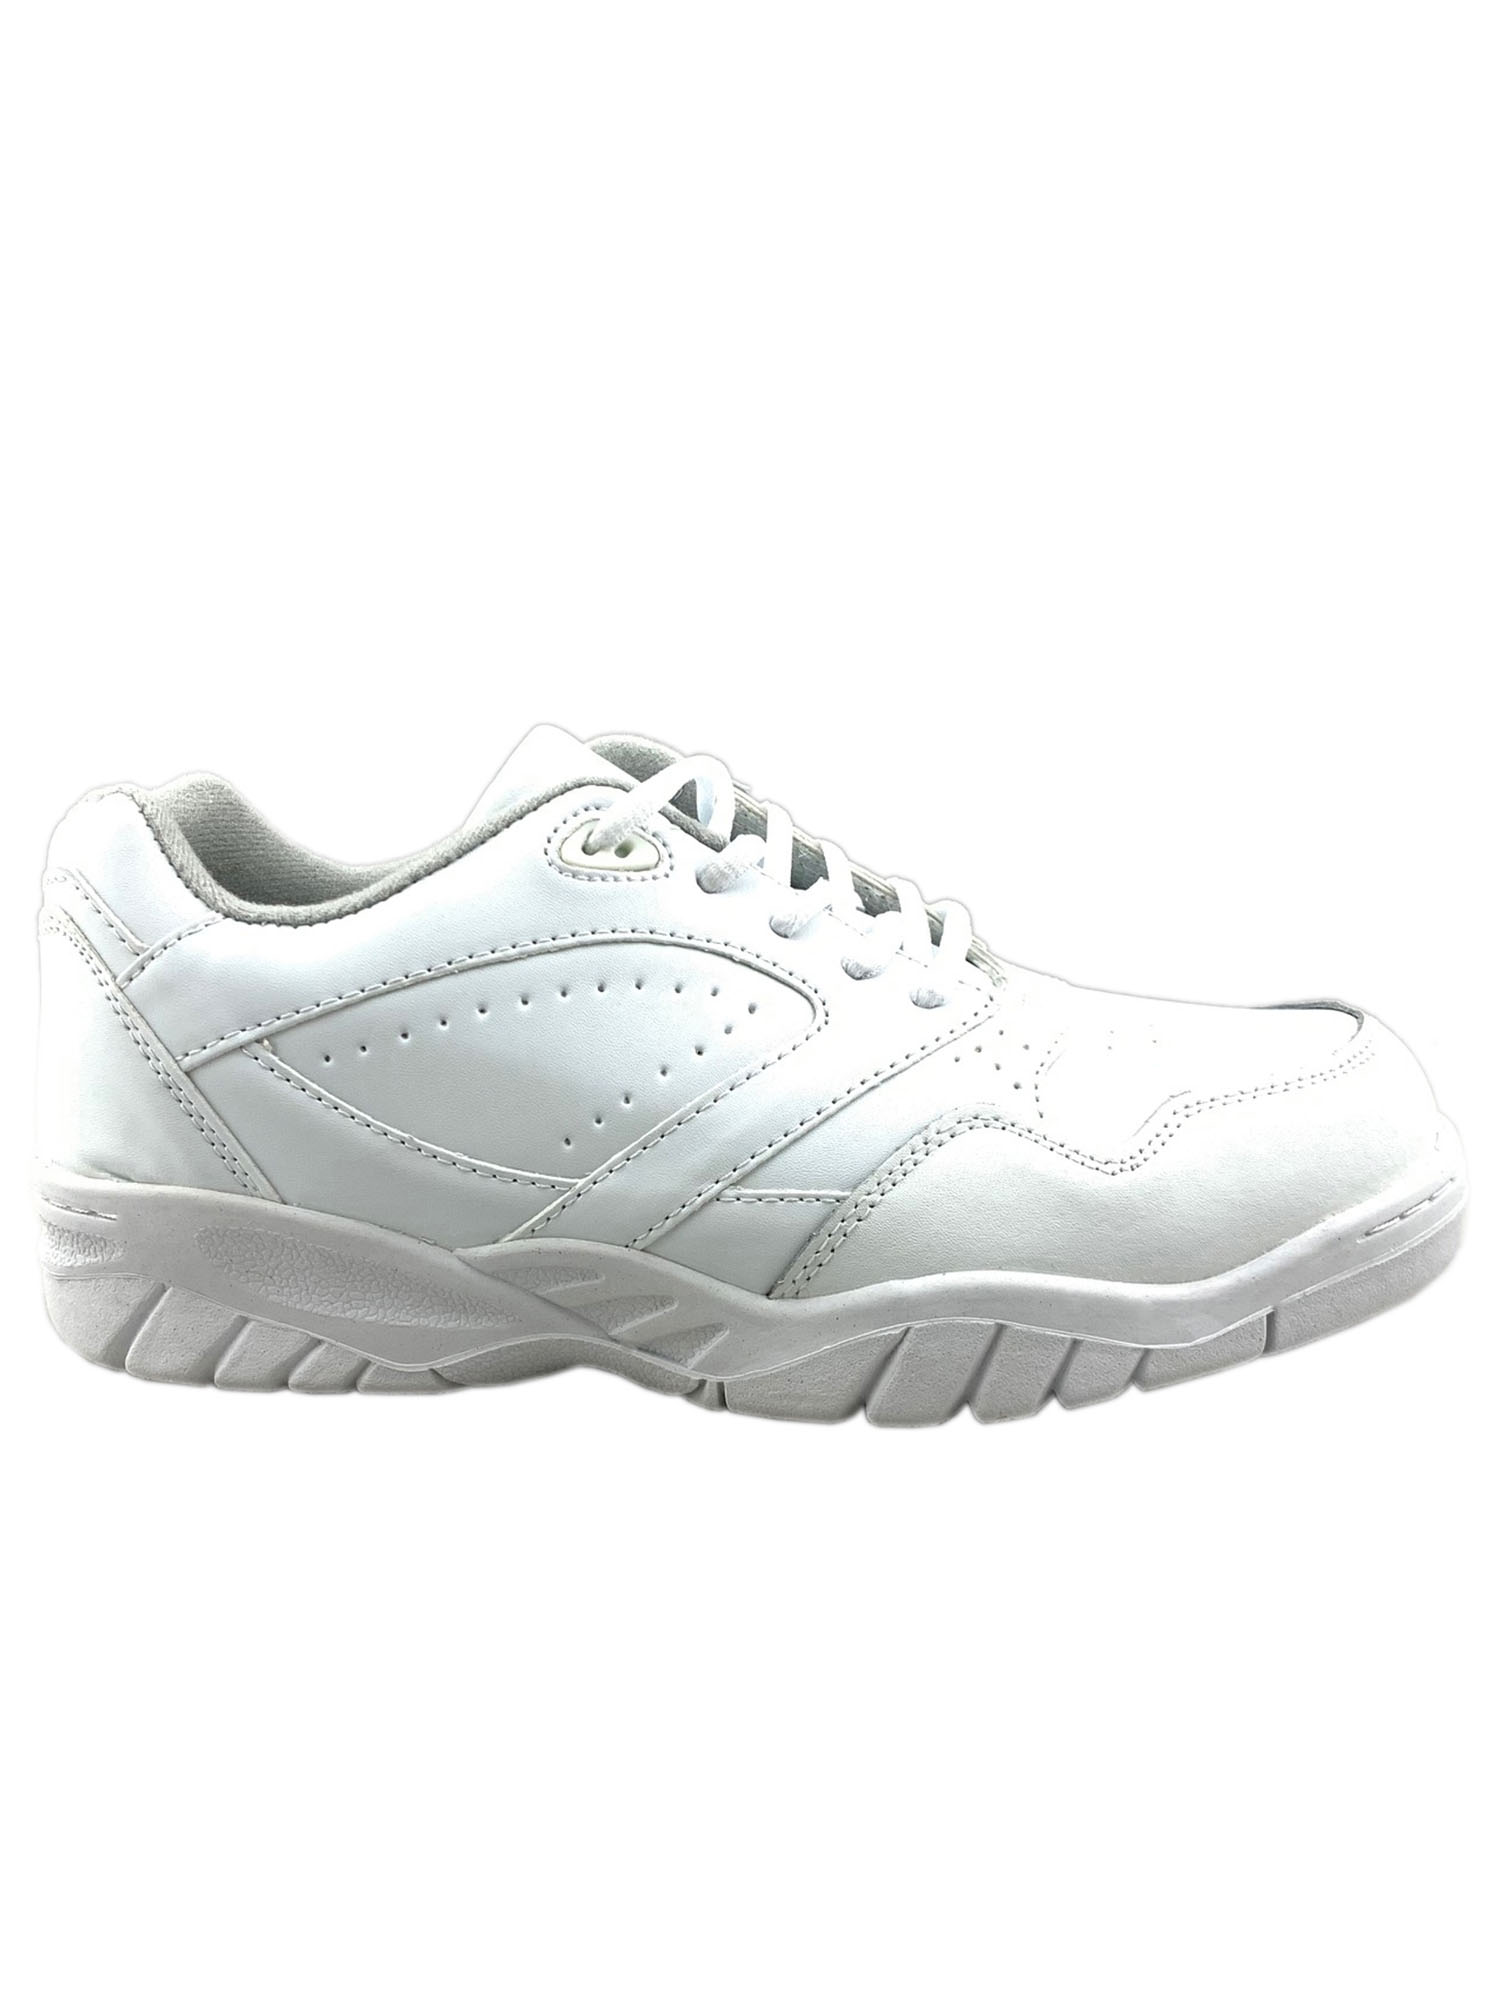 Tanleewa Men's Leather White Sports Shoes Lightweight Sneakers Breathable Casual Shoe Size 5 - image 1 of 5